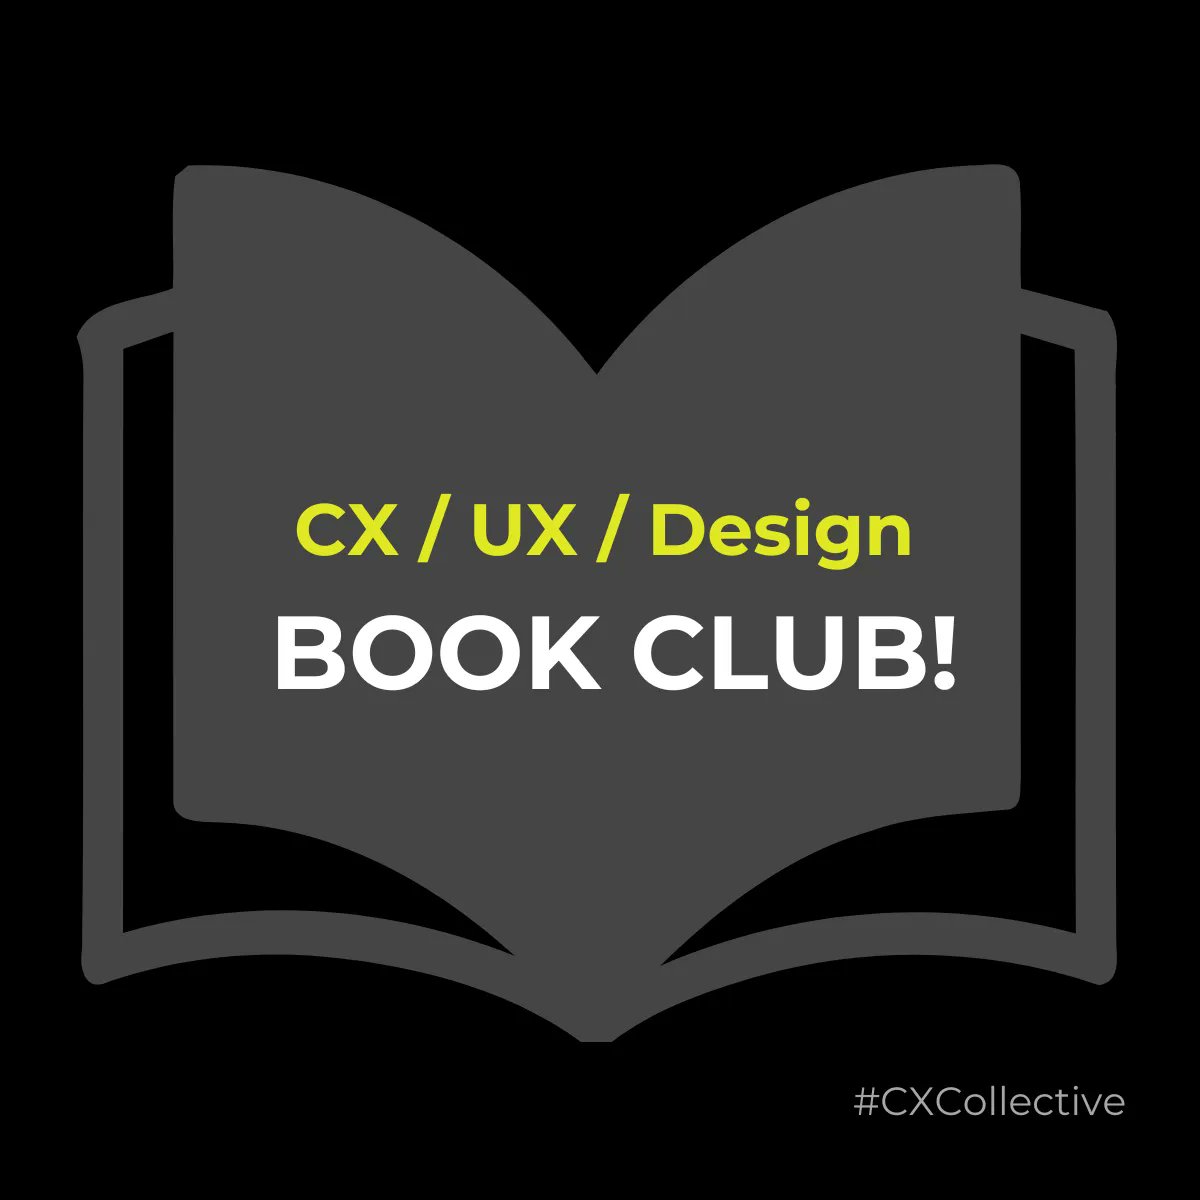 Introducing the CX Collective Book Club. Join us for one of our bi-monthly fireside chats on the latest design books and podcasts. buff.ly/3ASP92e #bookclub #design #hcd #cx #cxdesign #community